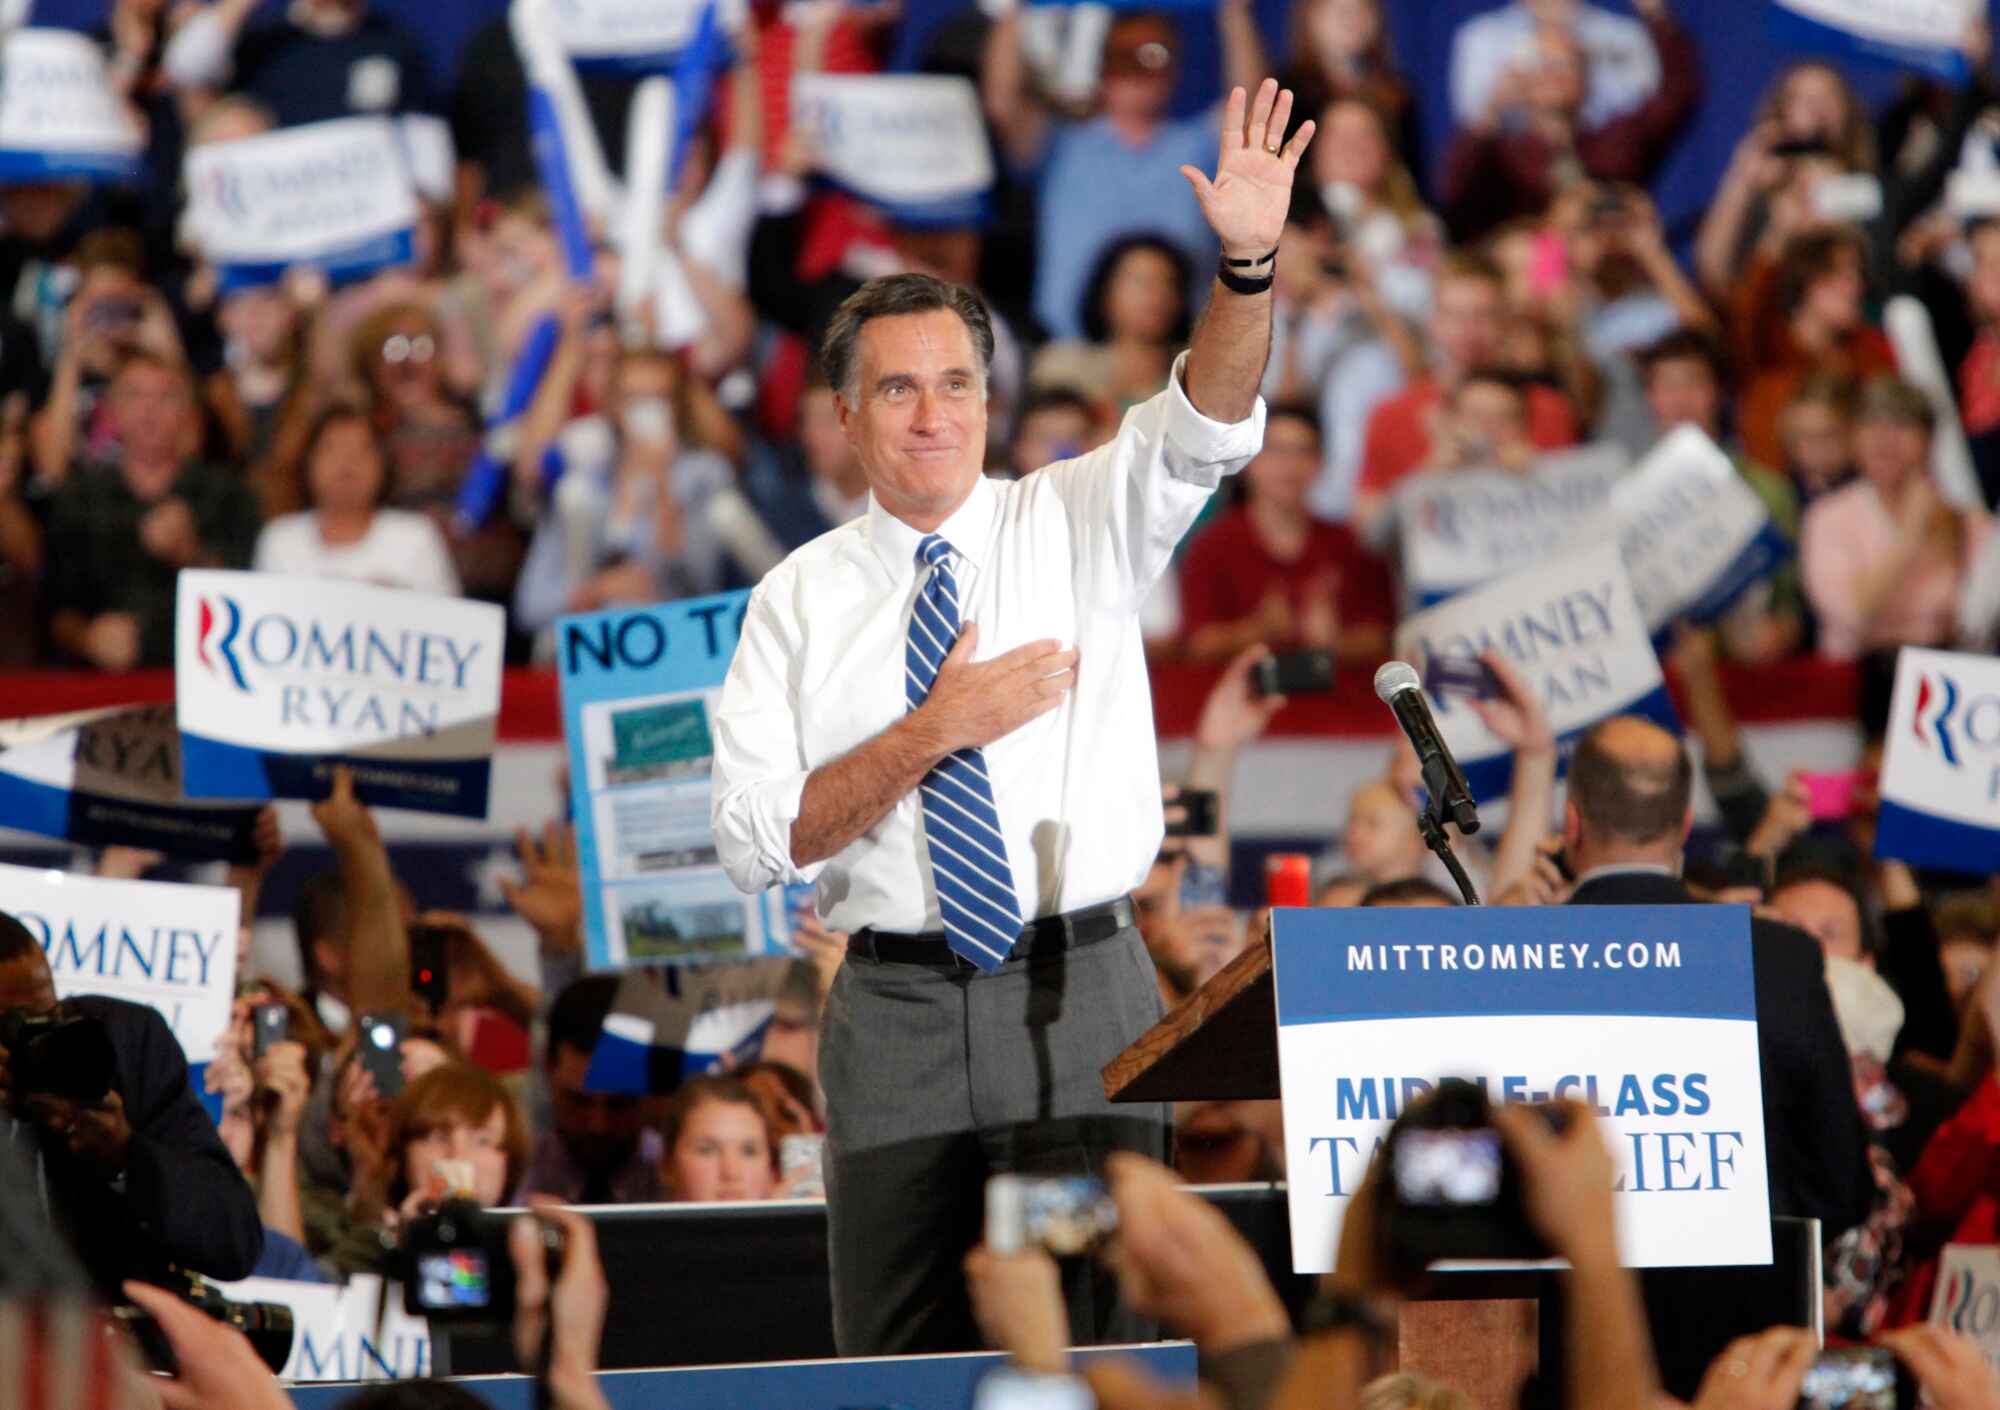 Utah Senator Mitt Romney announced that he will not seek a second term in 2024, calling on a new generation of leaders to rise up and replace Trump and Biden. (AP Photo/Matt Rose)